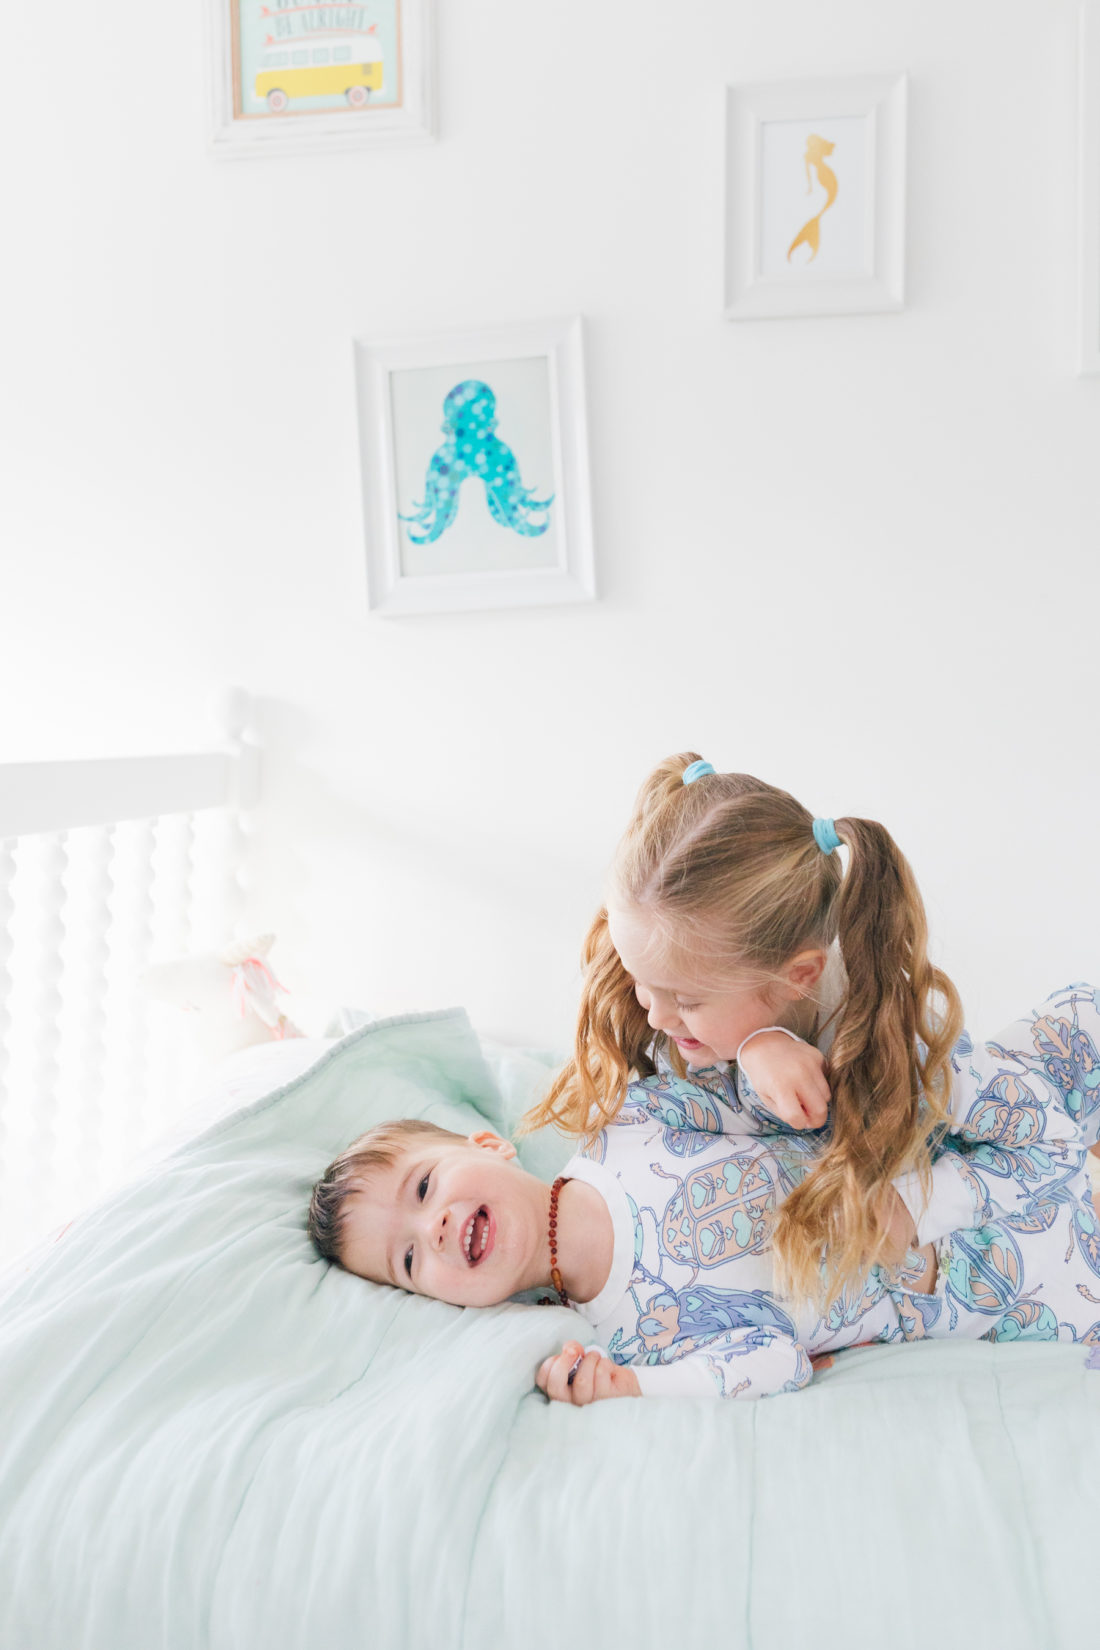 Marlowe Martino gives little brother Major a big hug while wearing matching blue bug pajamas from the Happily Eva After x Masala Baby capsule collection